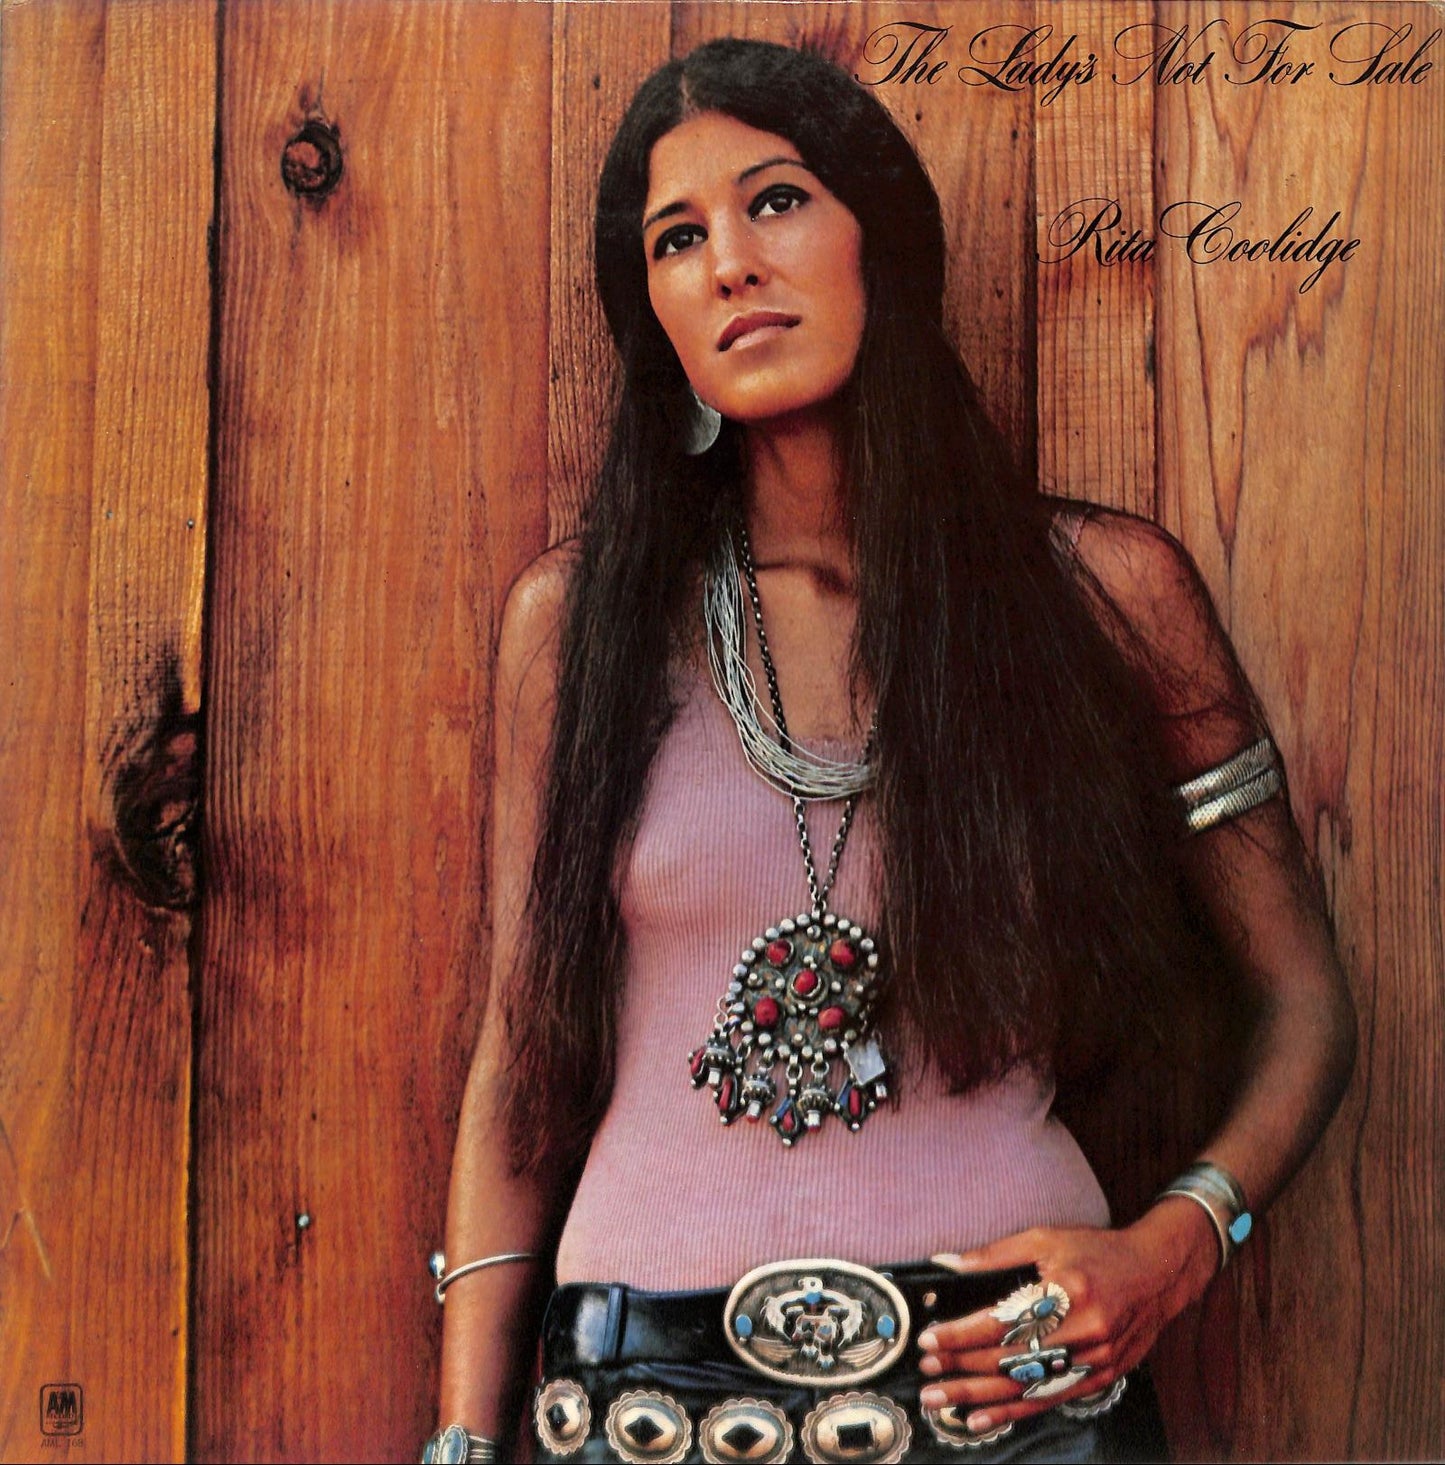 RITA COOLIDGE - The Lady's Not For Sale